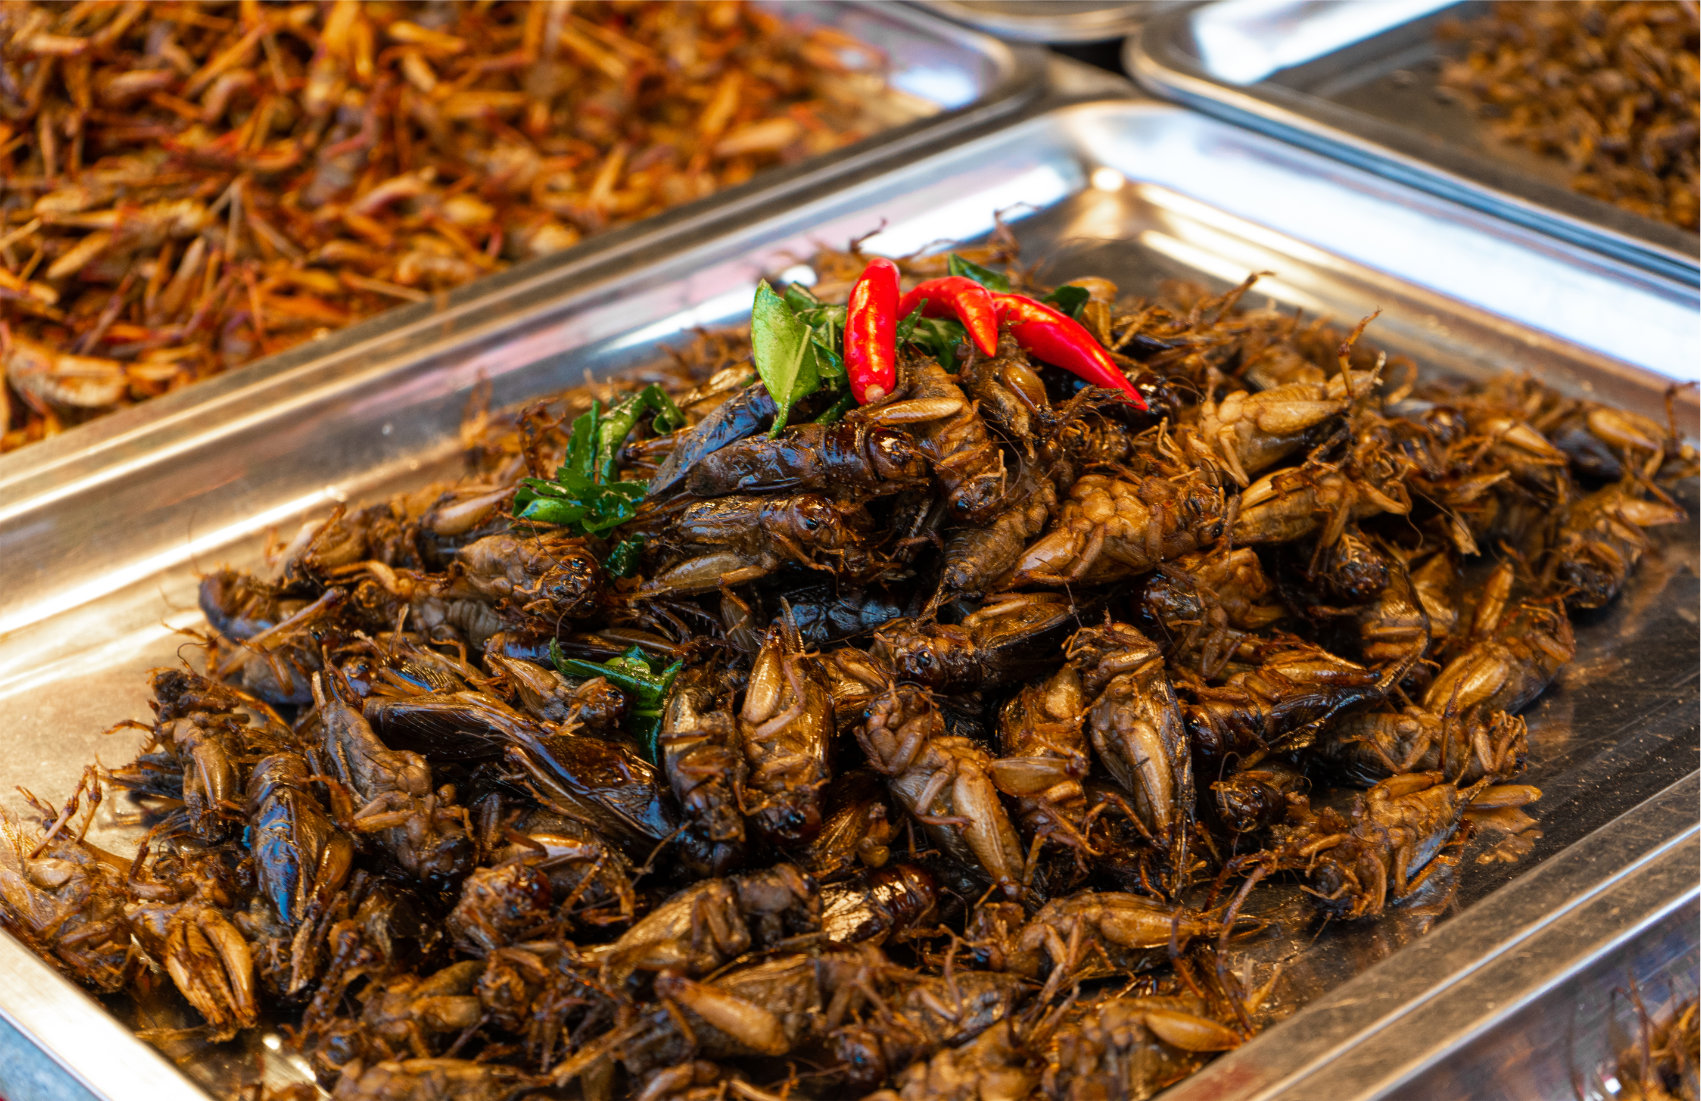 An image of fried cockroaches ready to be served